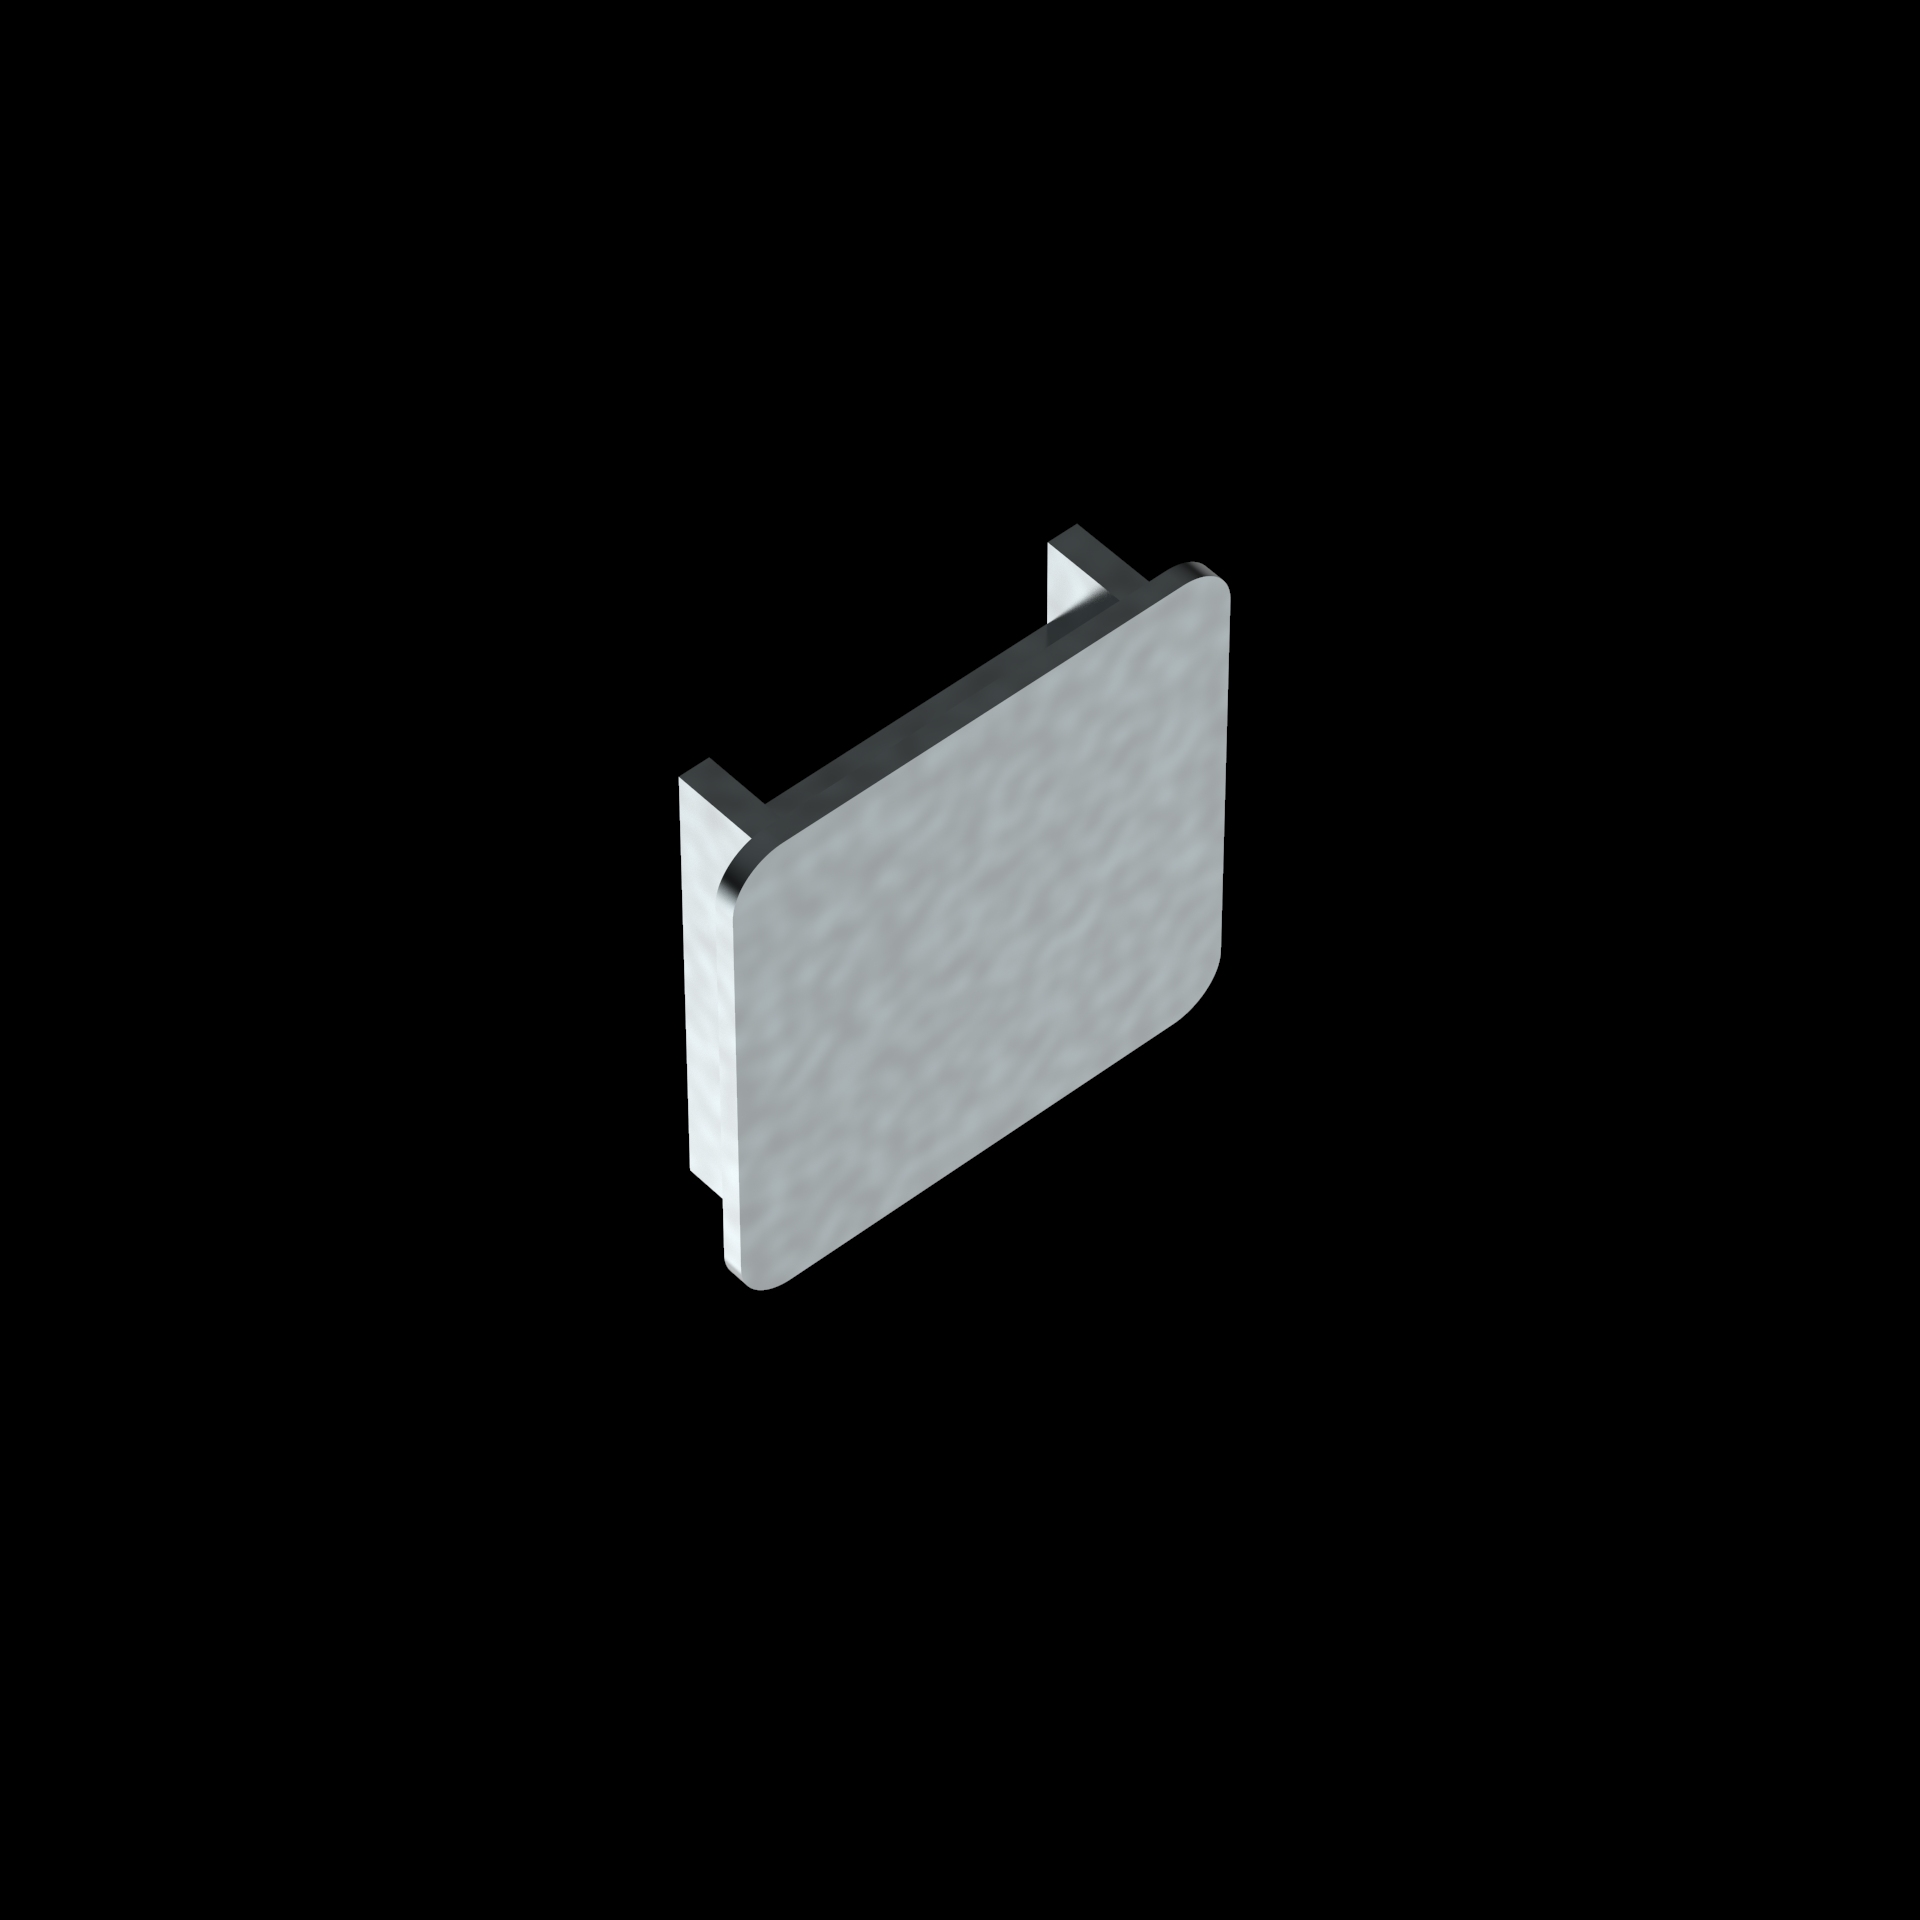 BS1180 Channel Closures Featured Image